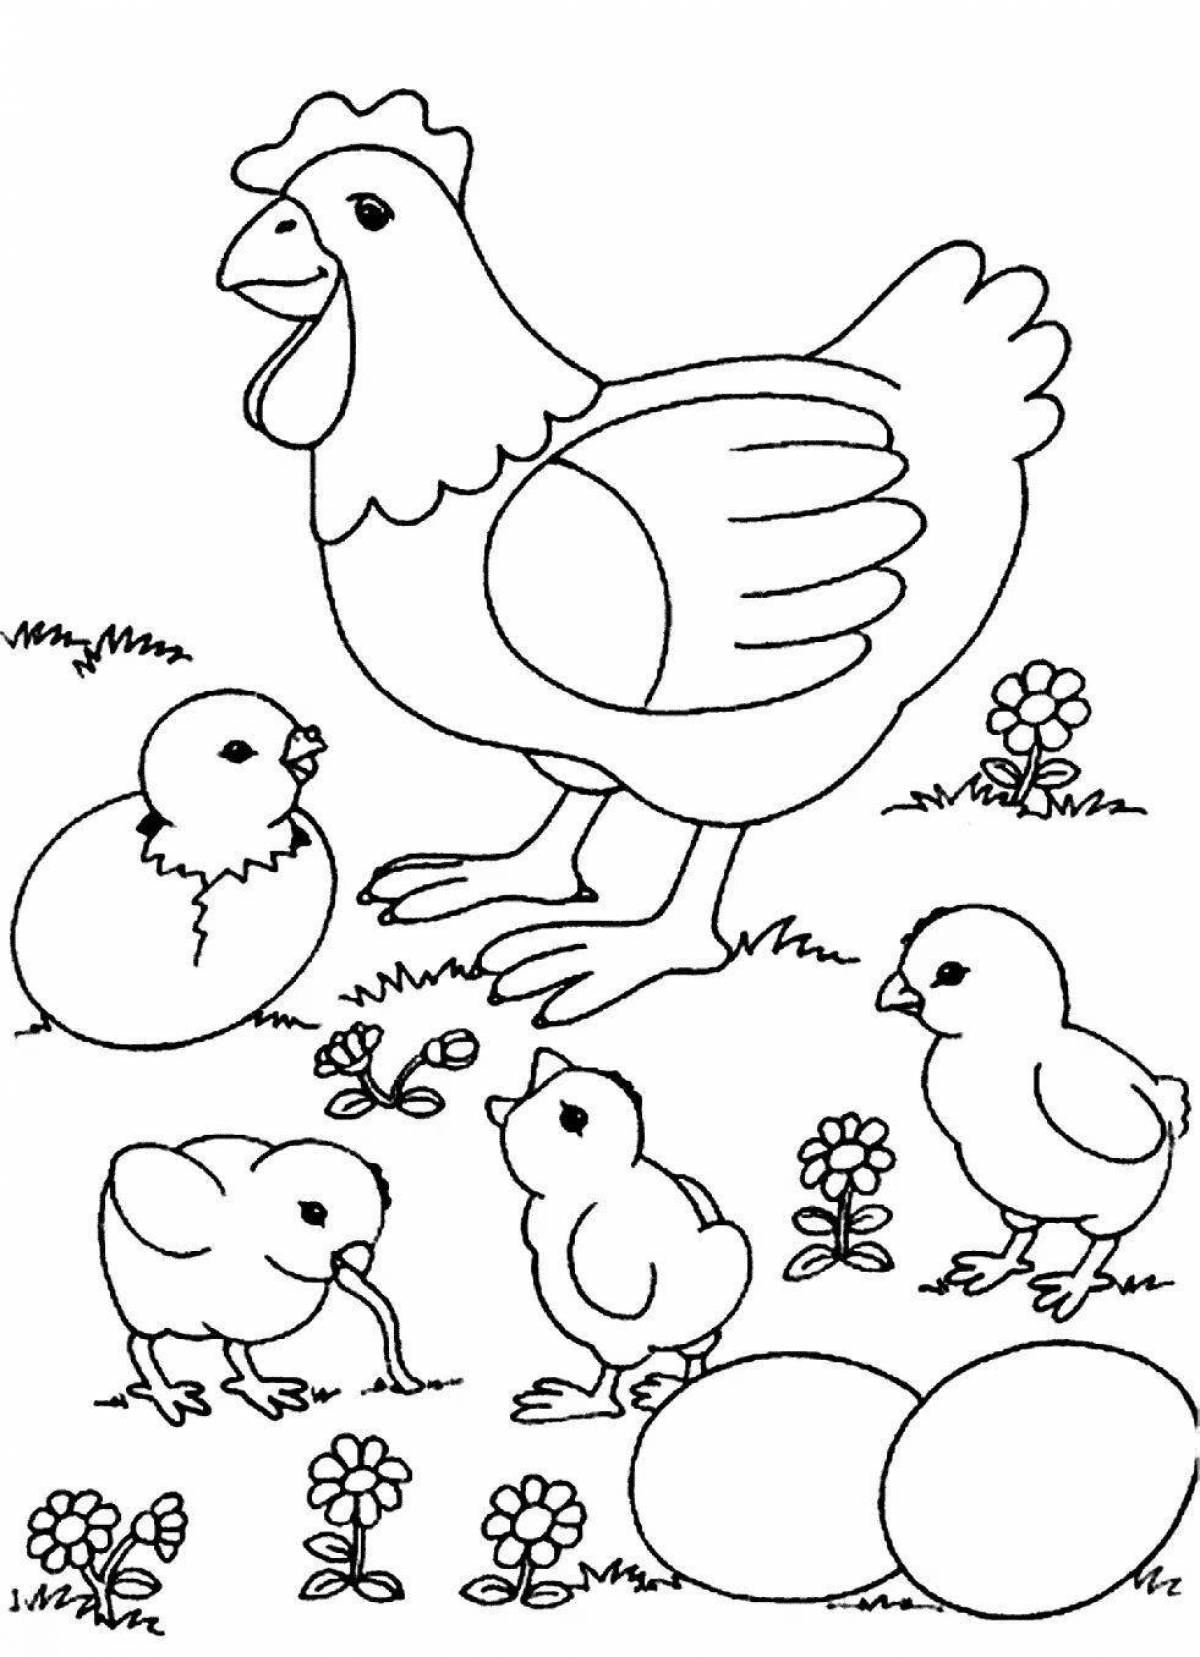 Coloring book exotic chickens for children 6-7 years old